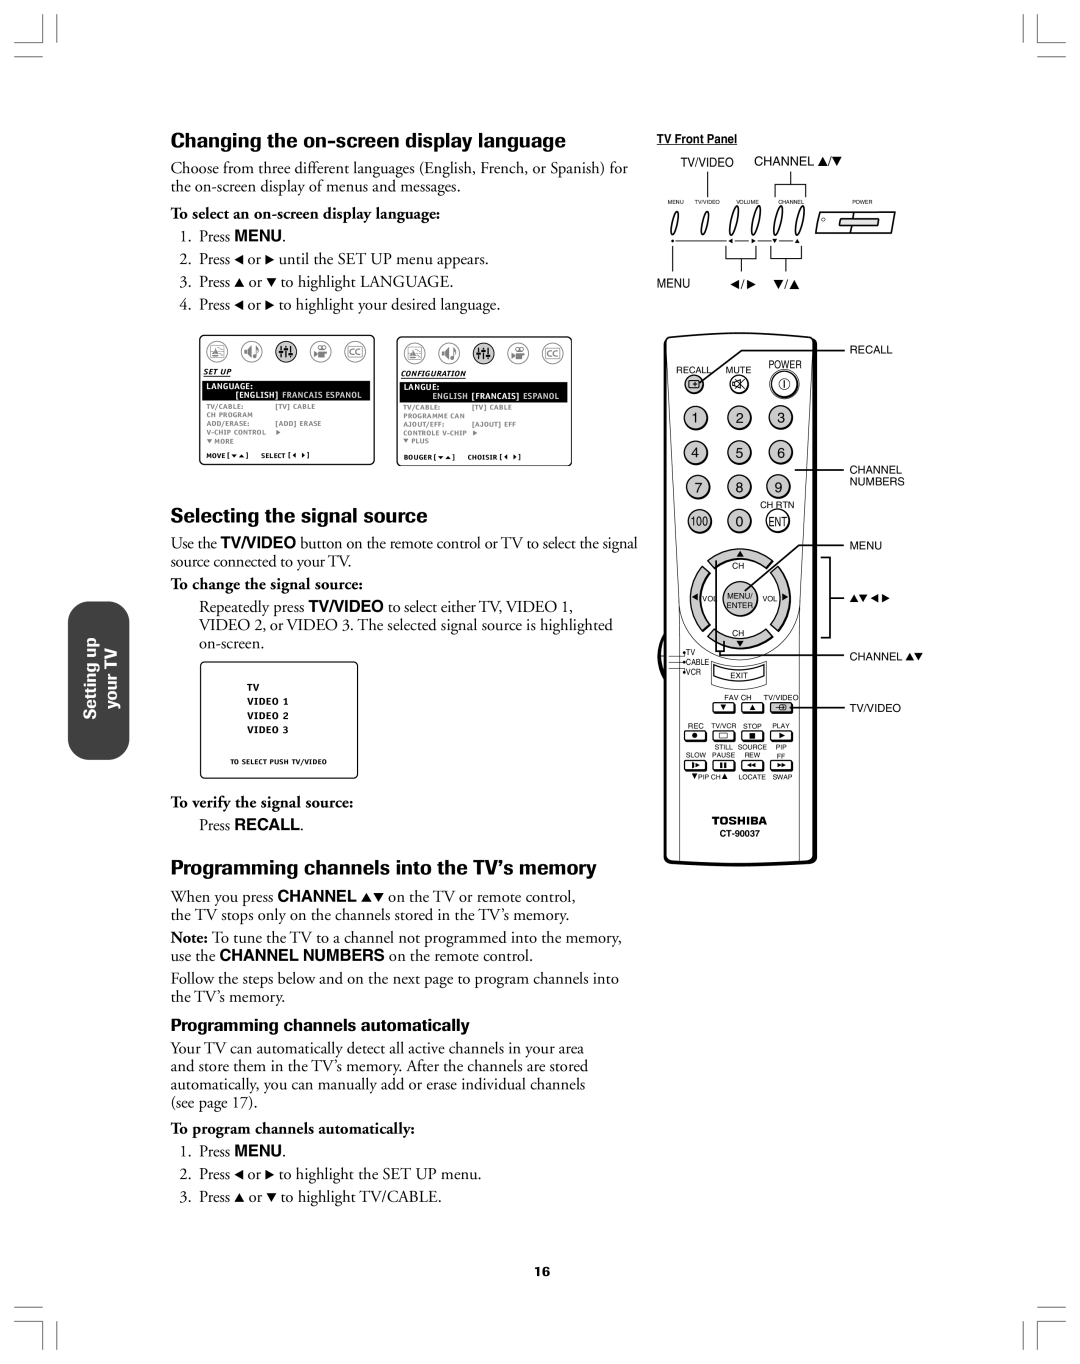 Toshiba 34AS42 Changing the on-screen display language, Selecting the signal source, Programming channels automatically 